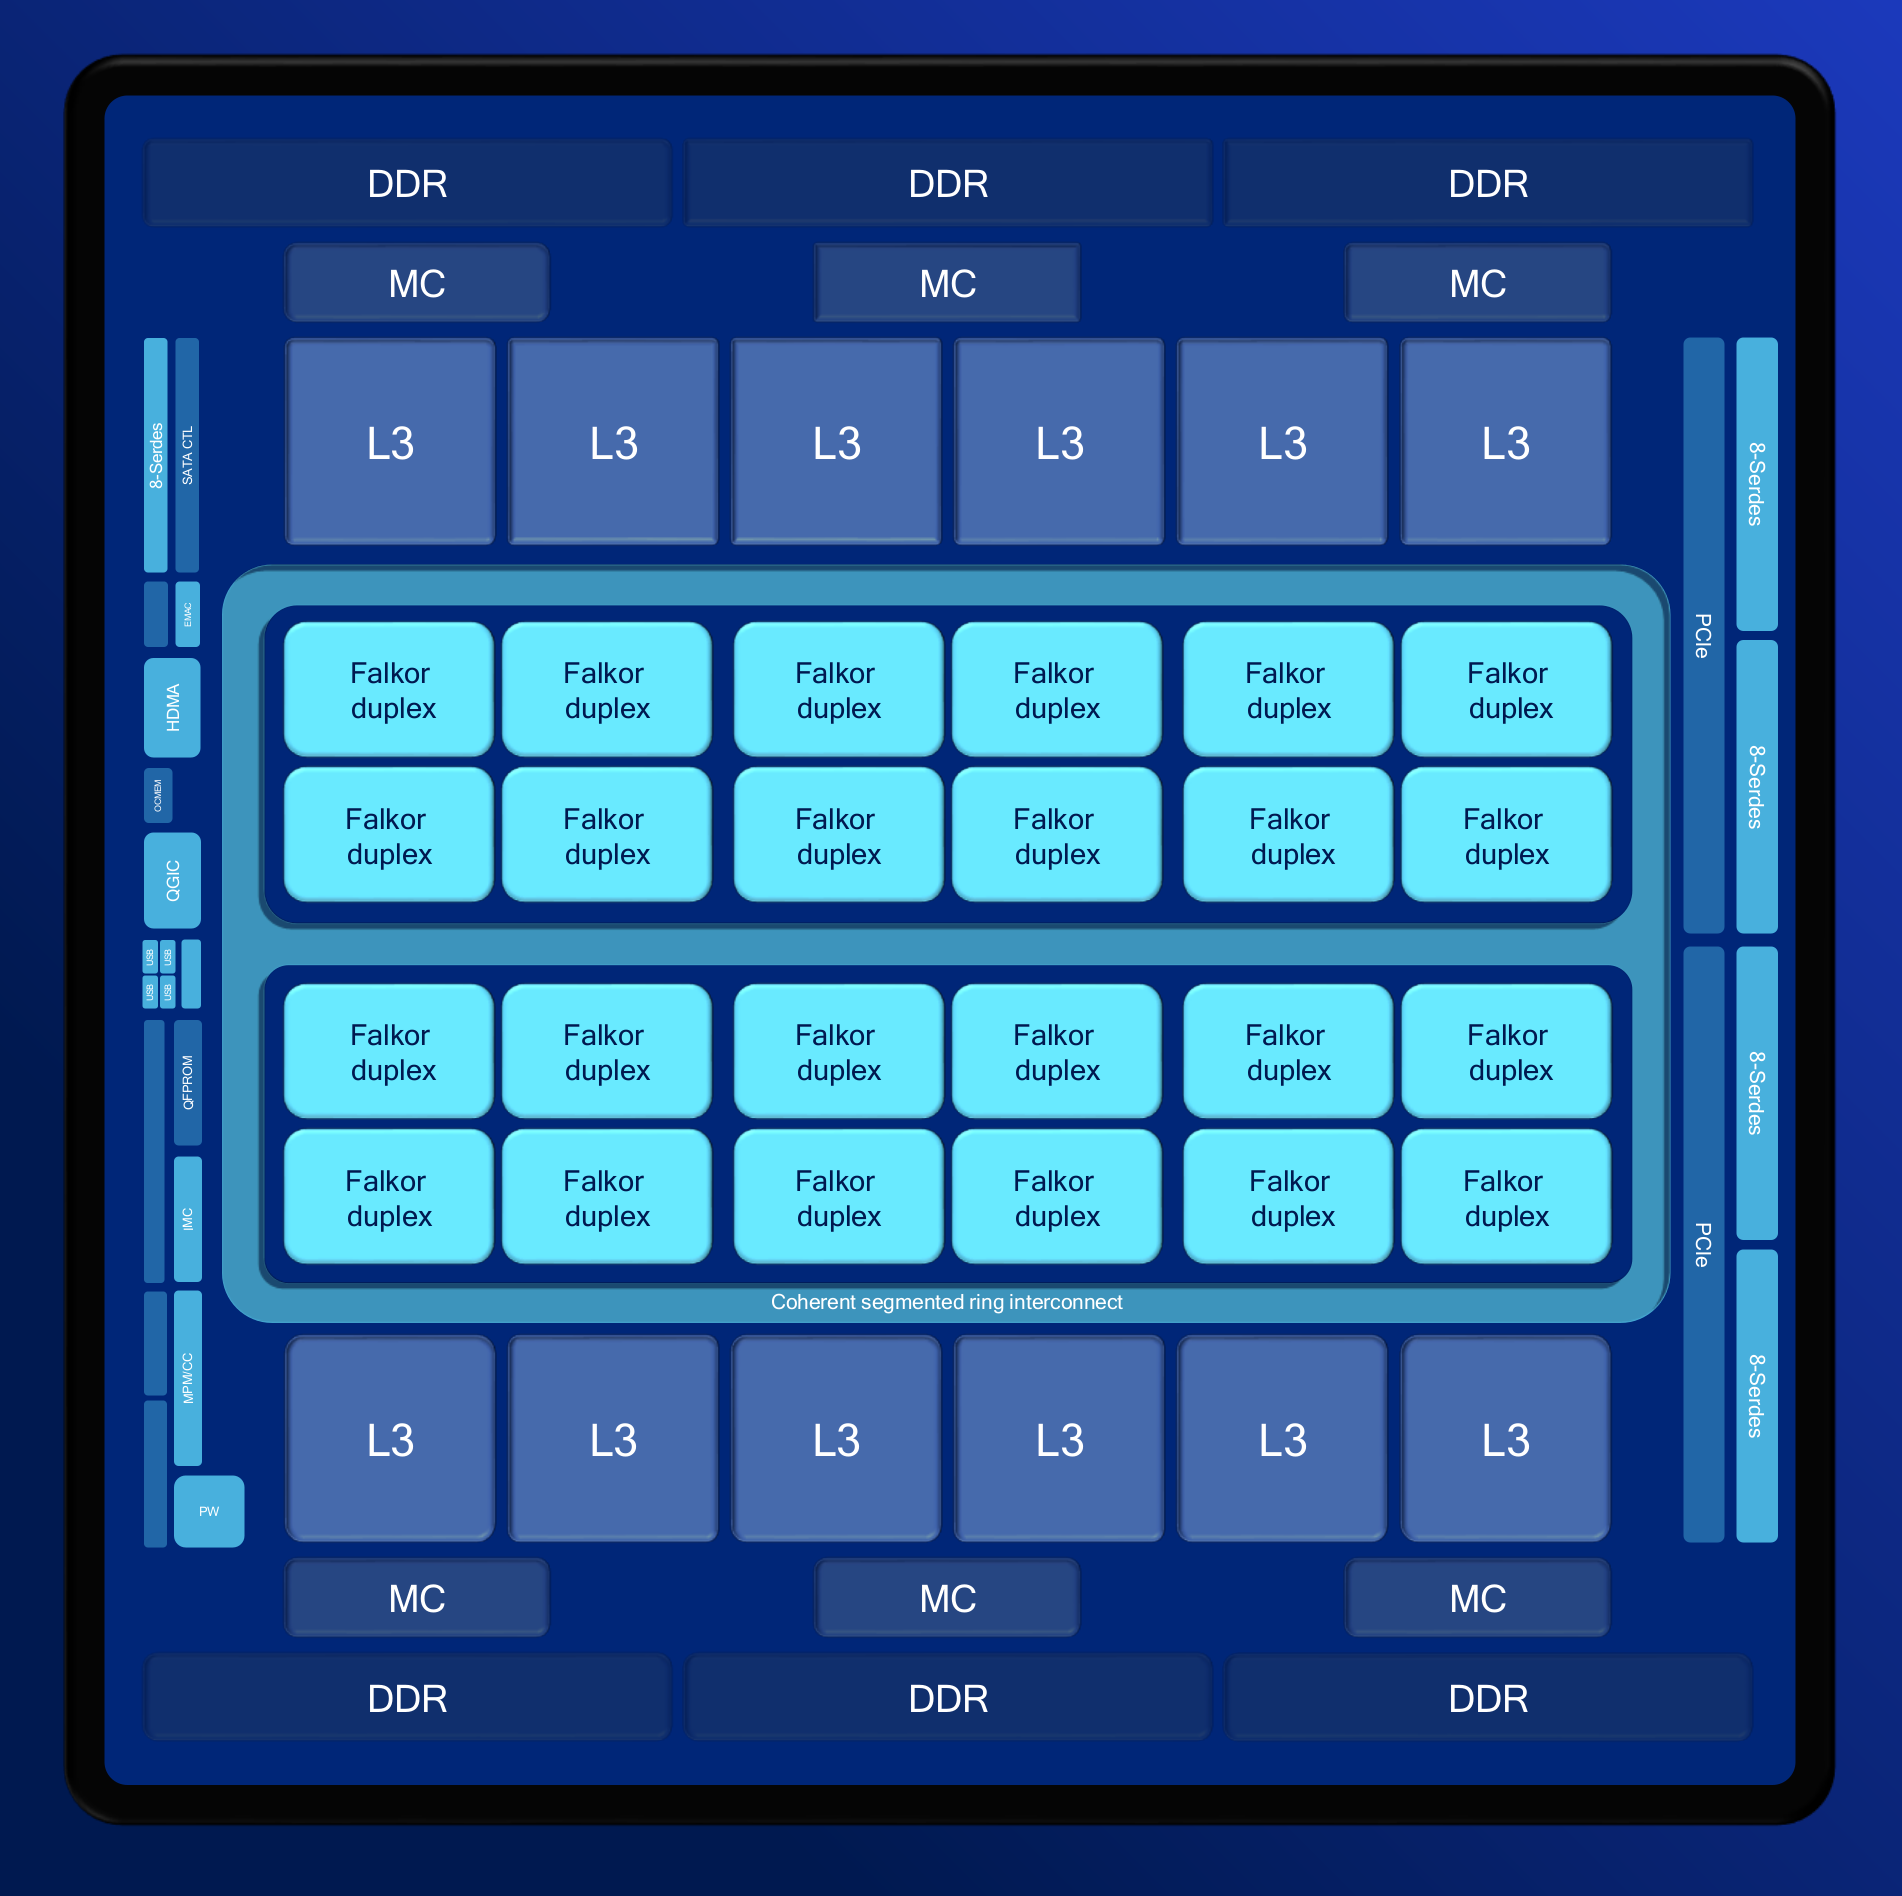 qualcomm-centriq-2400-arm-soc-launched-for-datacenters-benchmarked-against-intel-xeon-socs